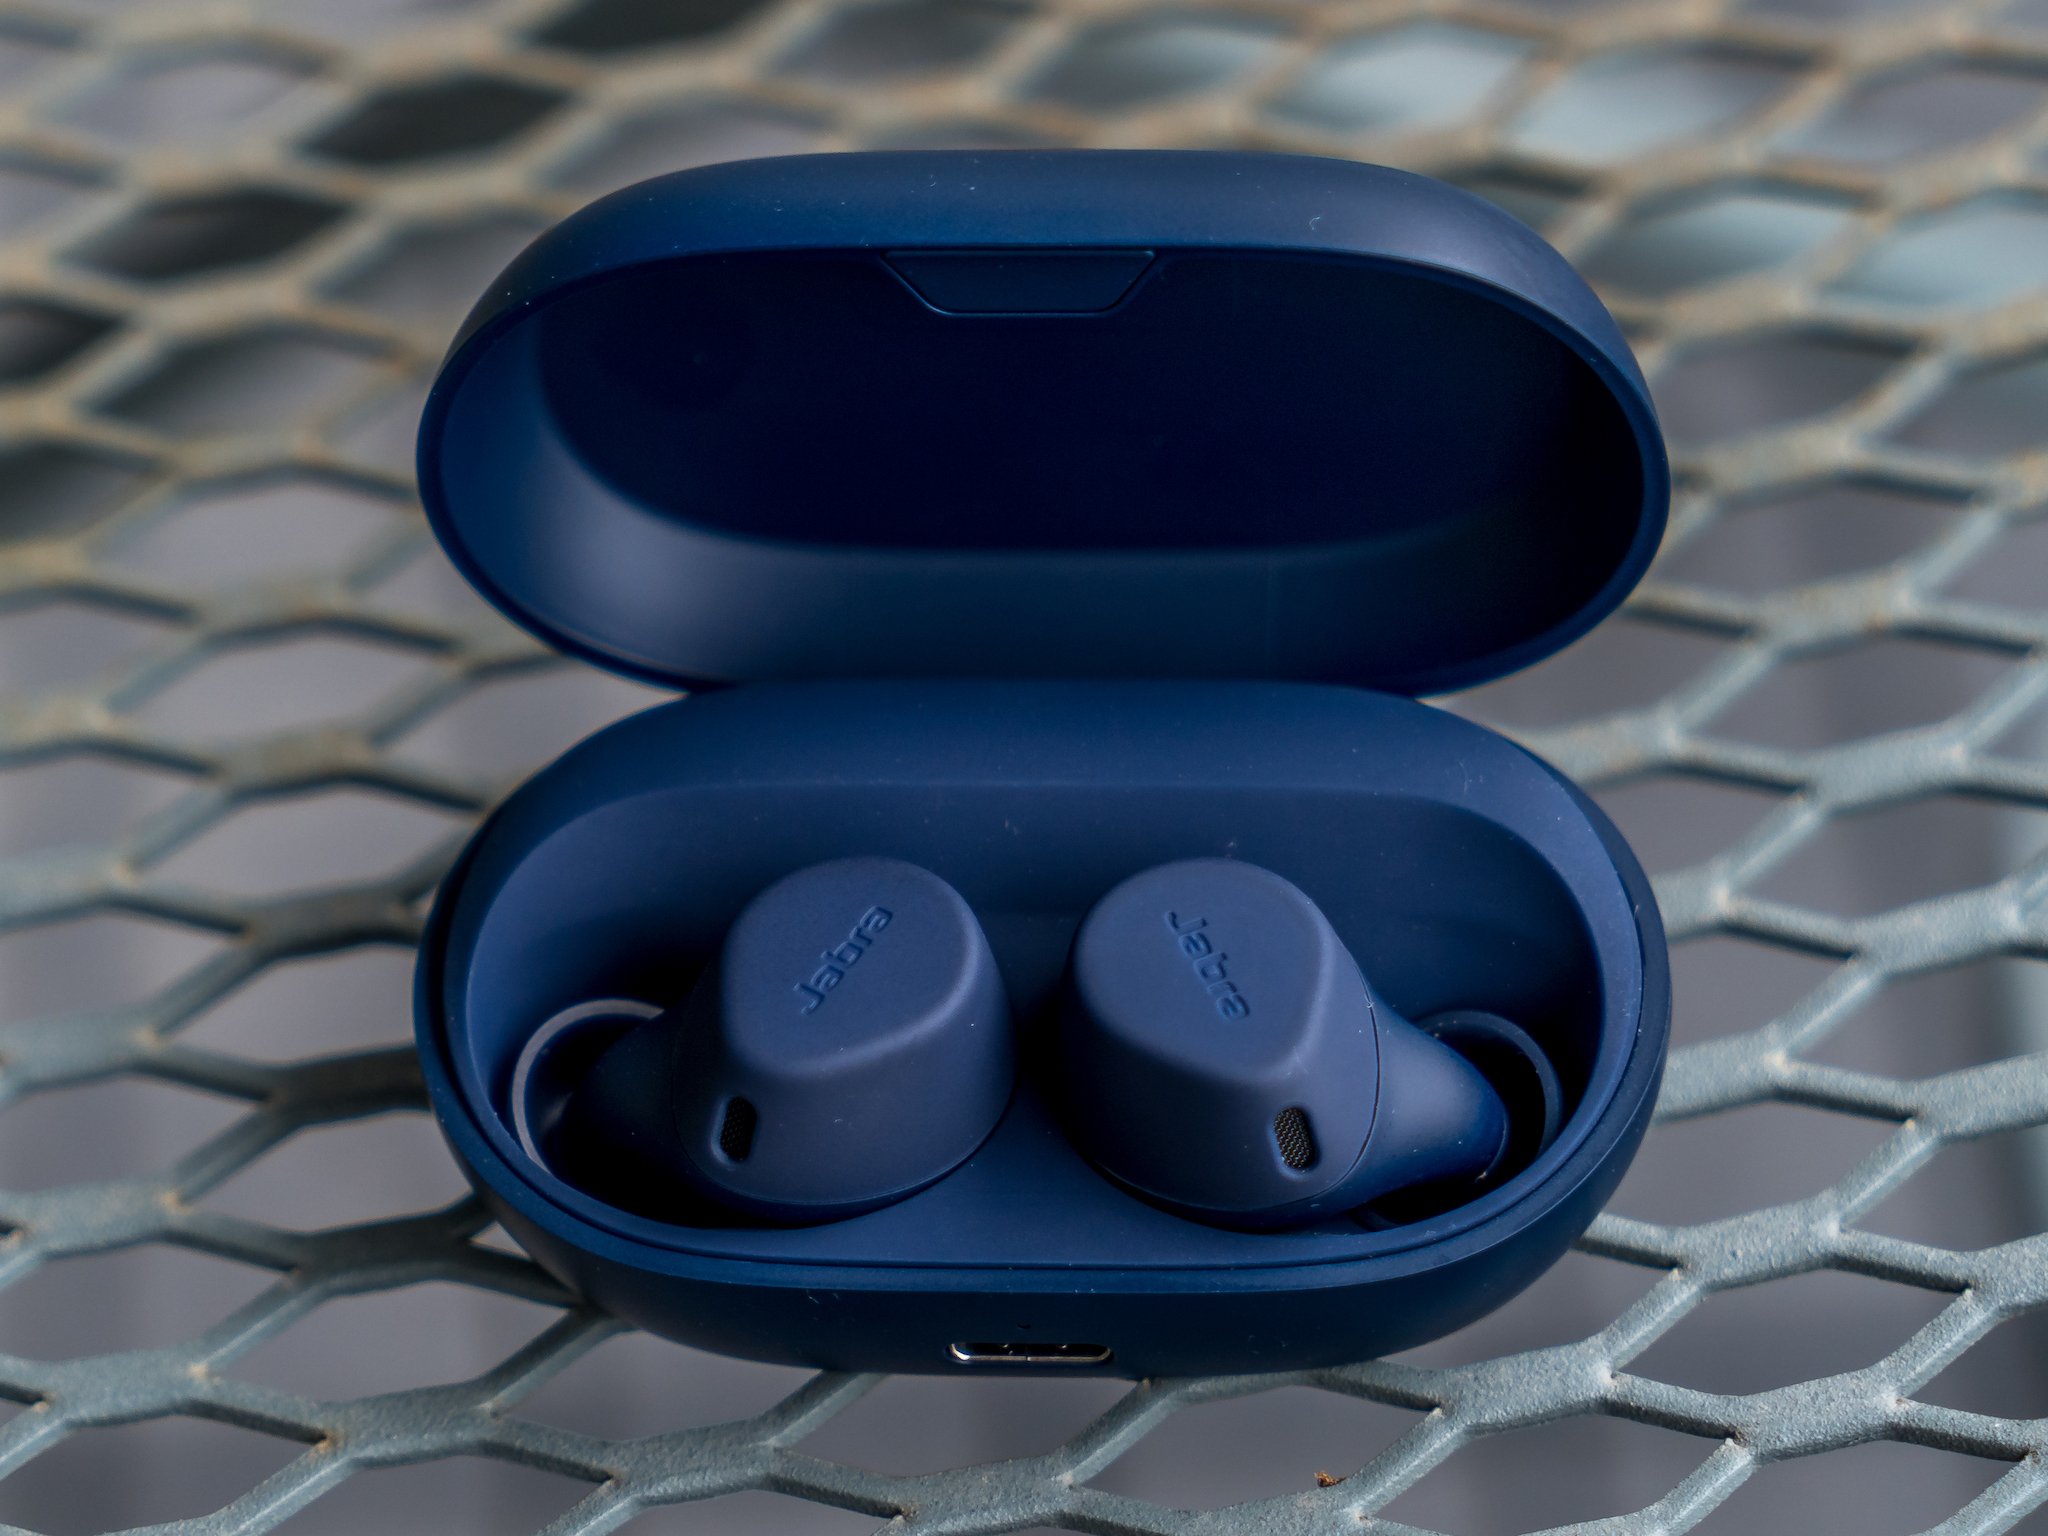 Jabra Elite 7 Active review: These 'twin' buds serve a good